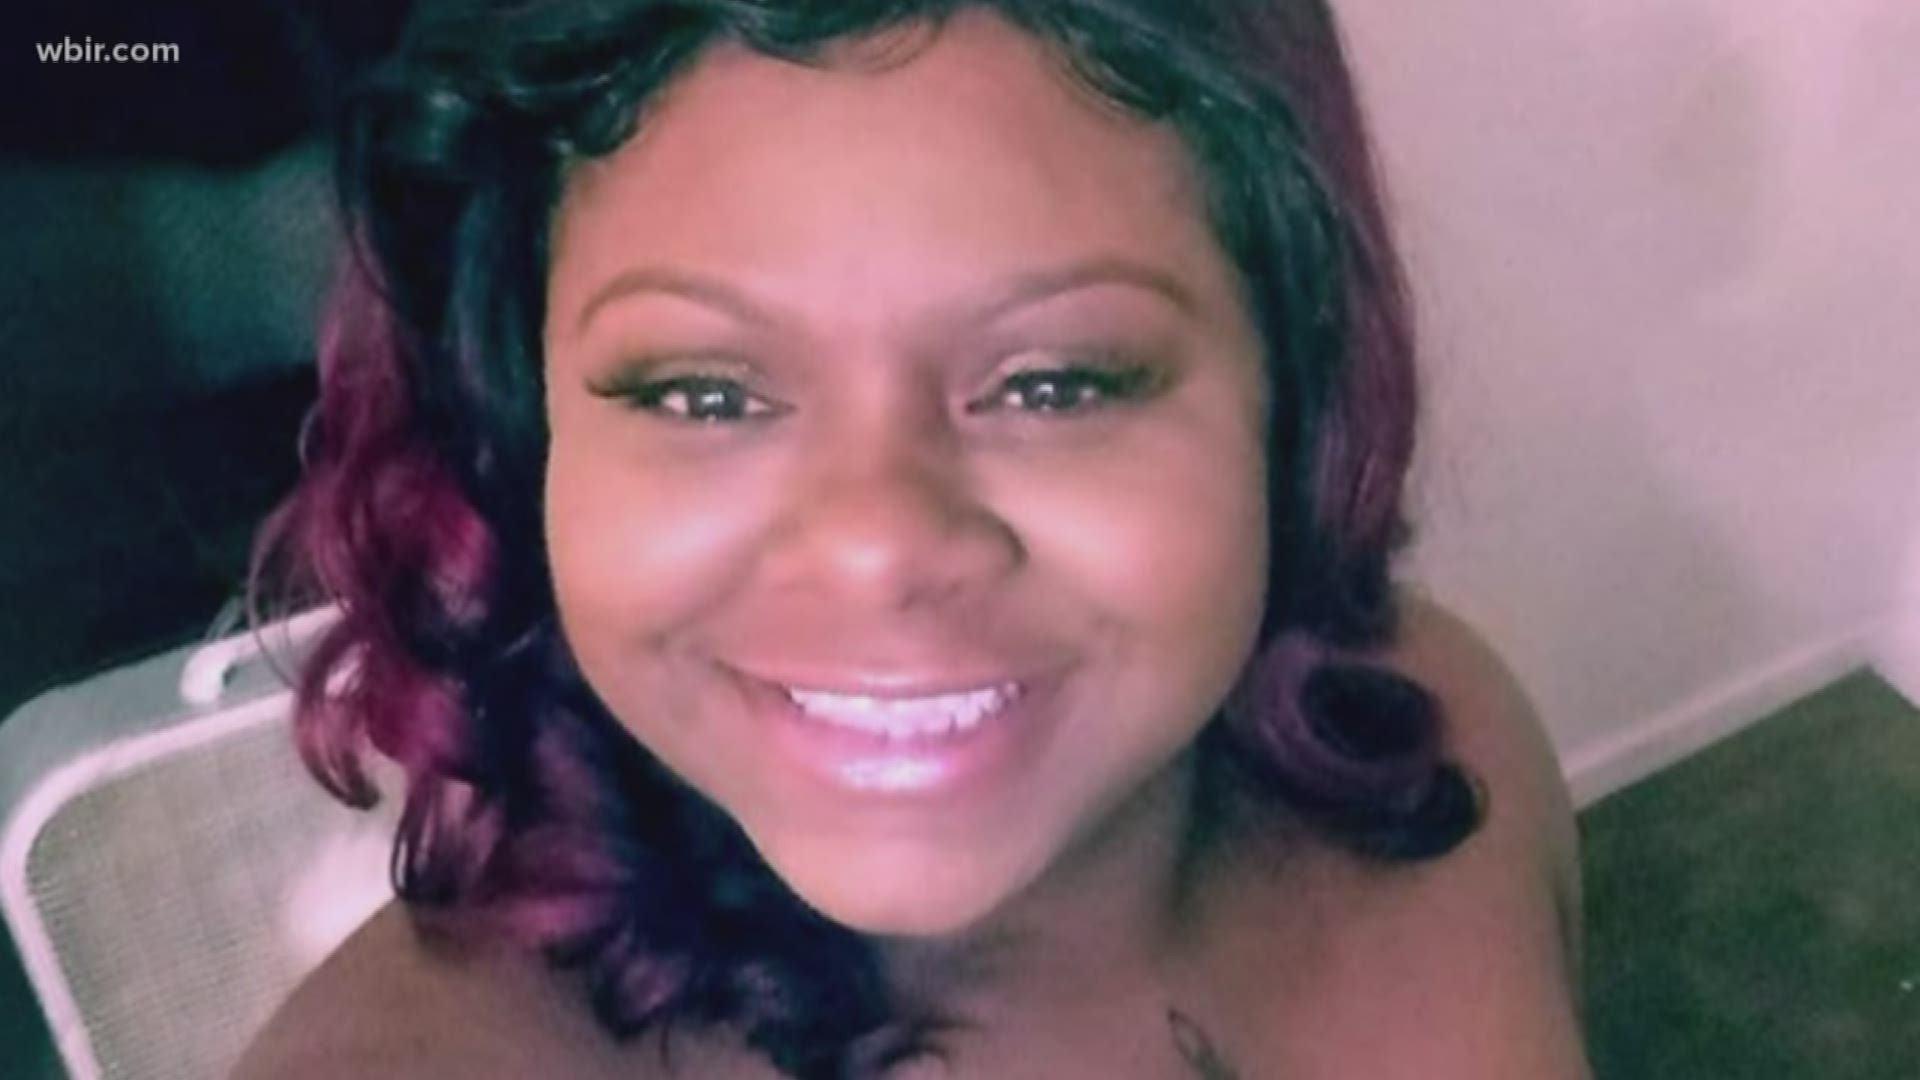 Jessie Roberts was killed in March 2019 while waiting in a Krystal drive-thru off North Broadway. The bullet came from a shooting in front of a club.